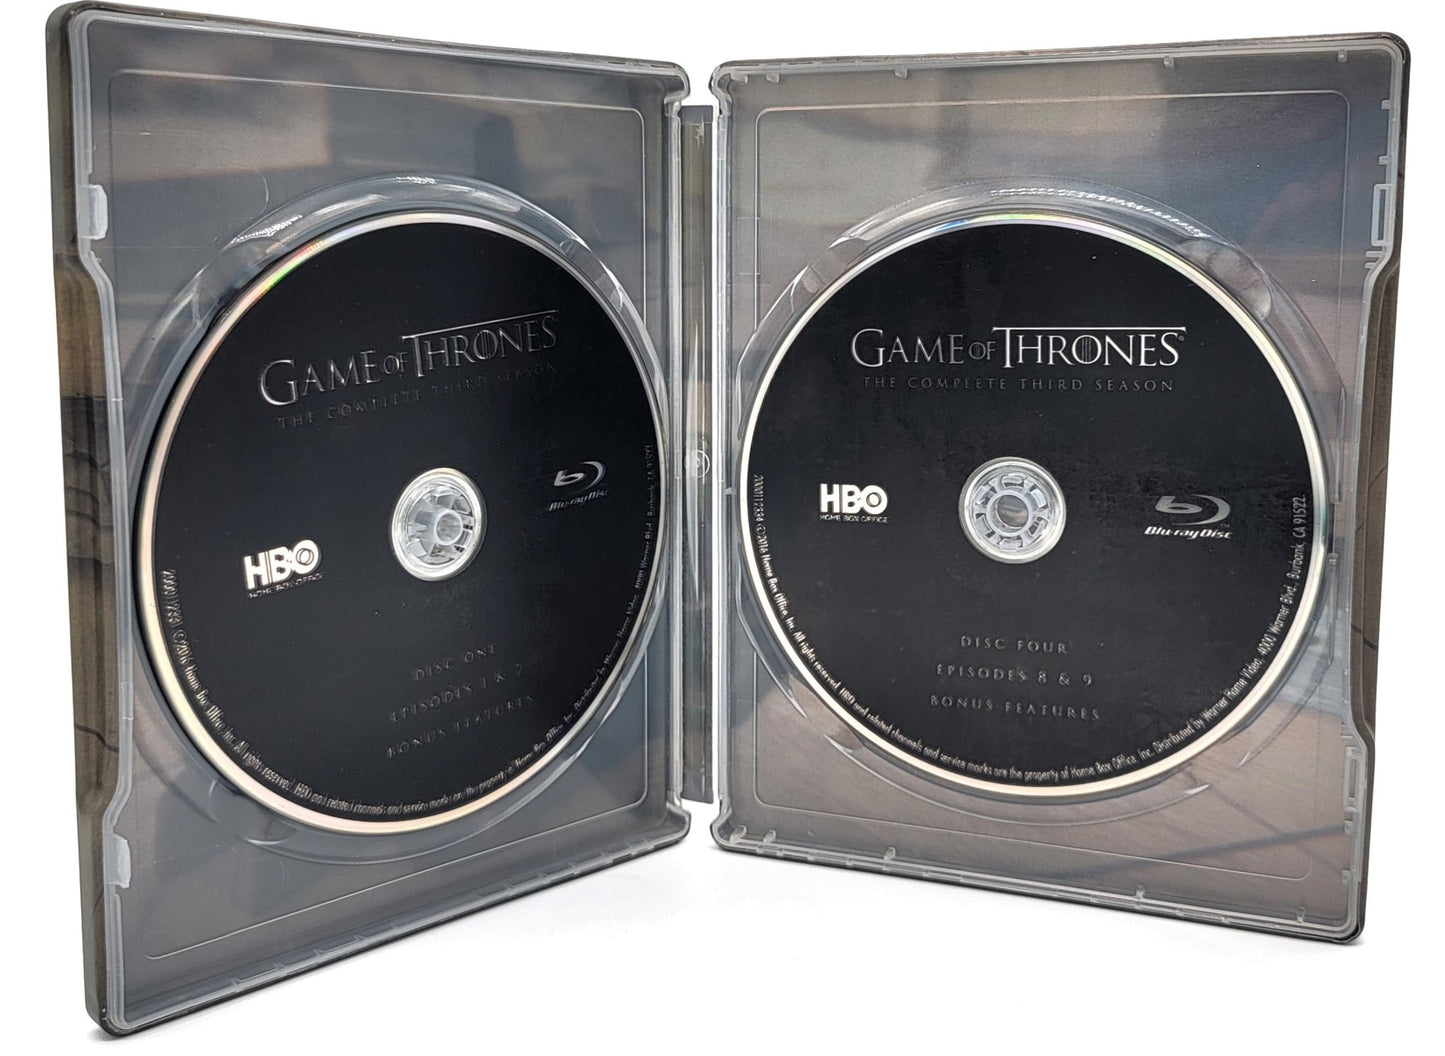 HBO Home Entertainment - Steel Book Game of Thrones - The Twins - The Complete Third Season | Blu Ray 5 Disc Set - Limited Edition Collectors Tin - Blu-ray - Steady Bunny Shop